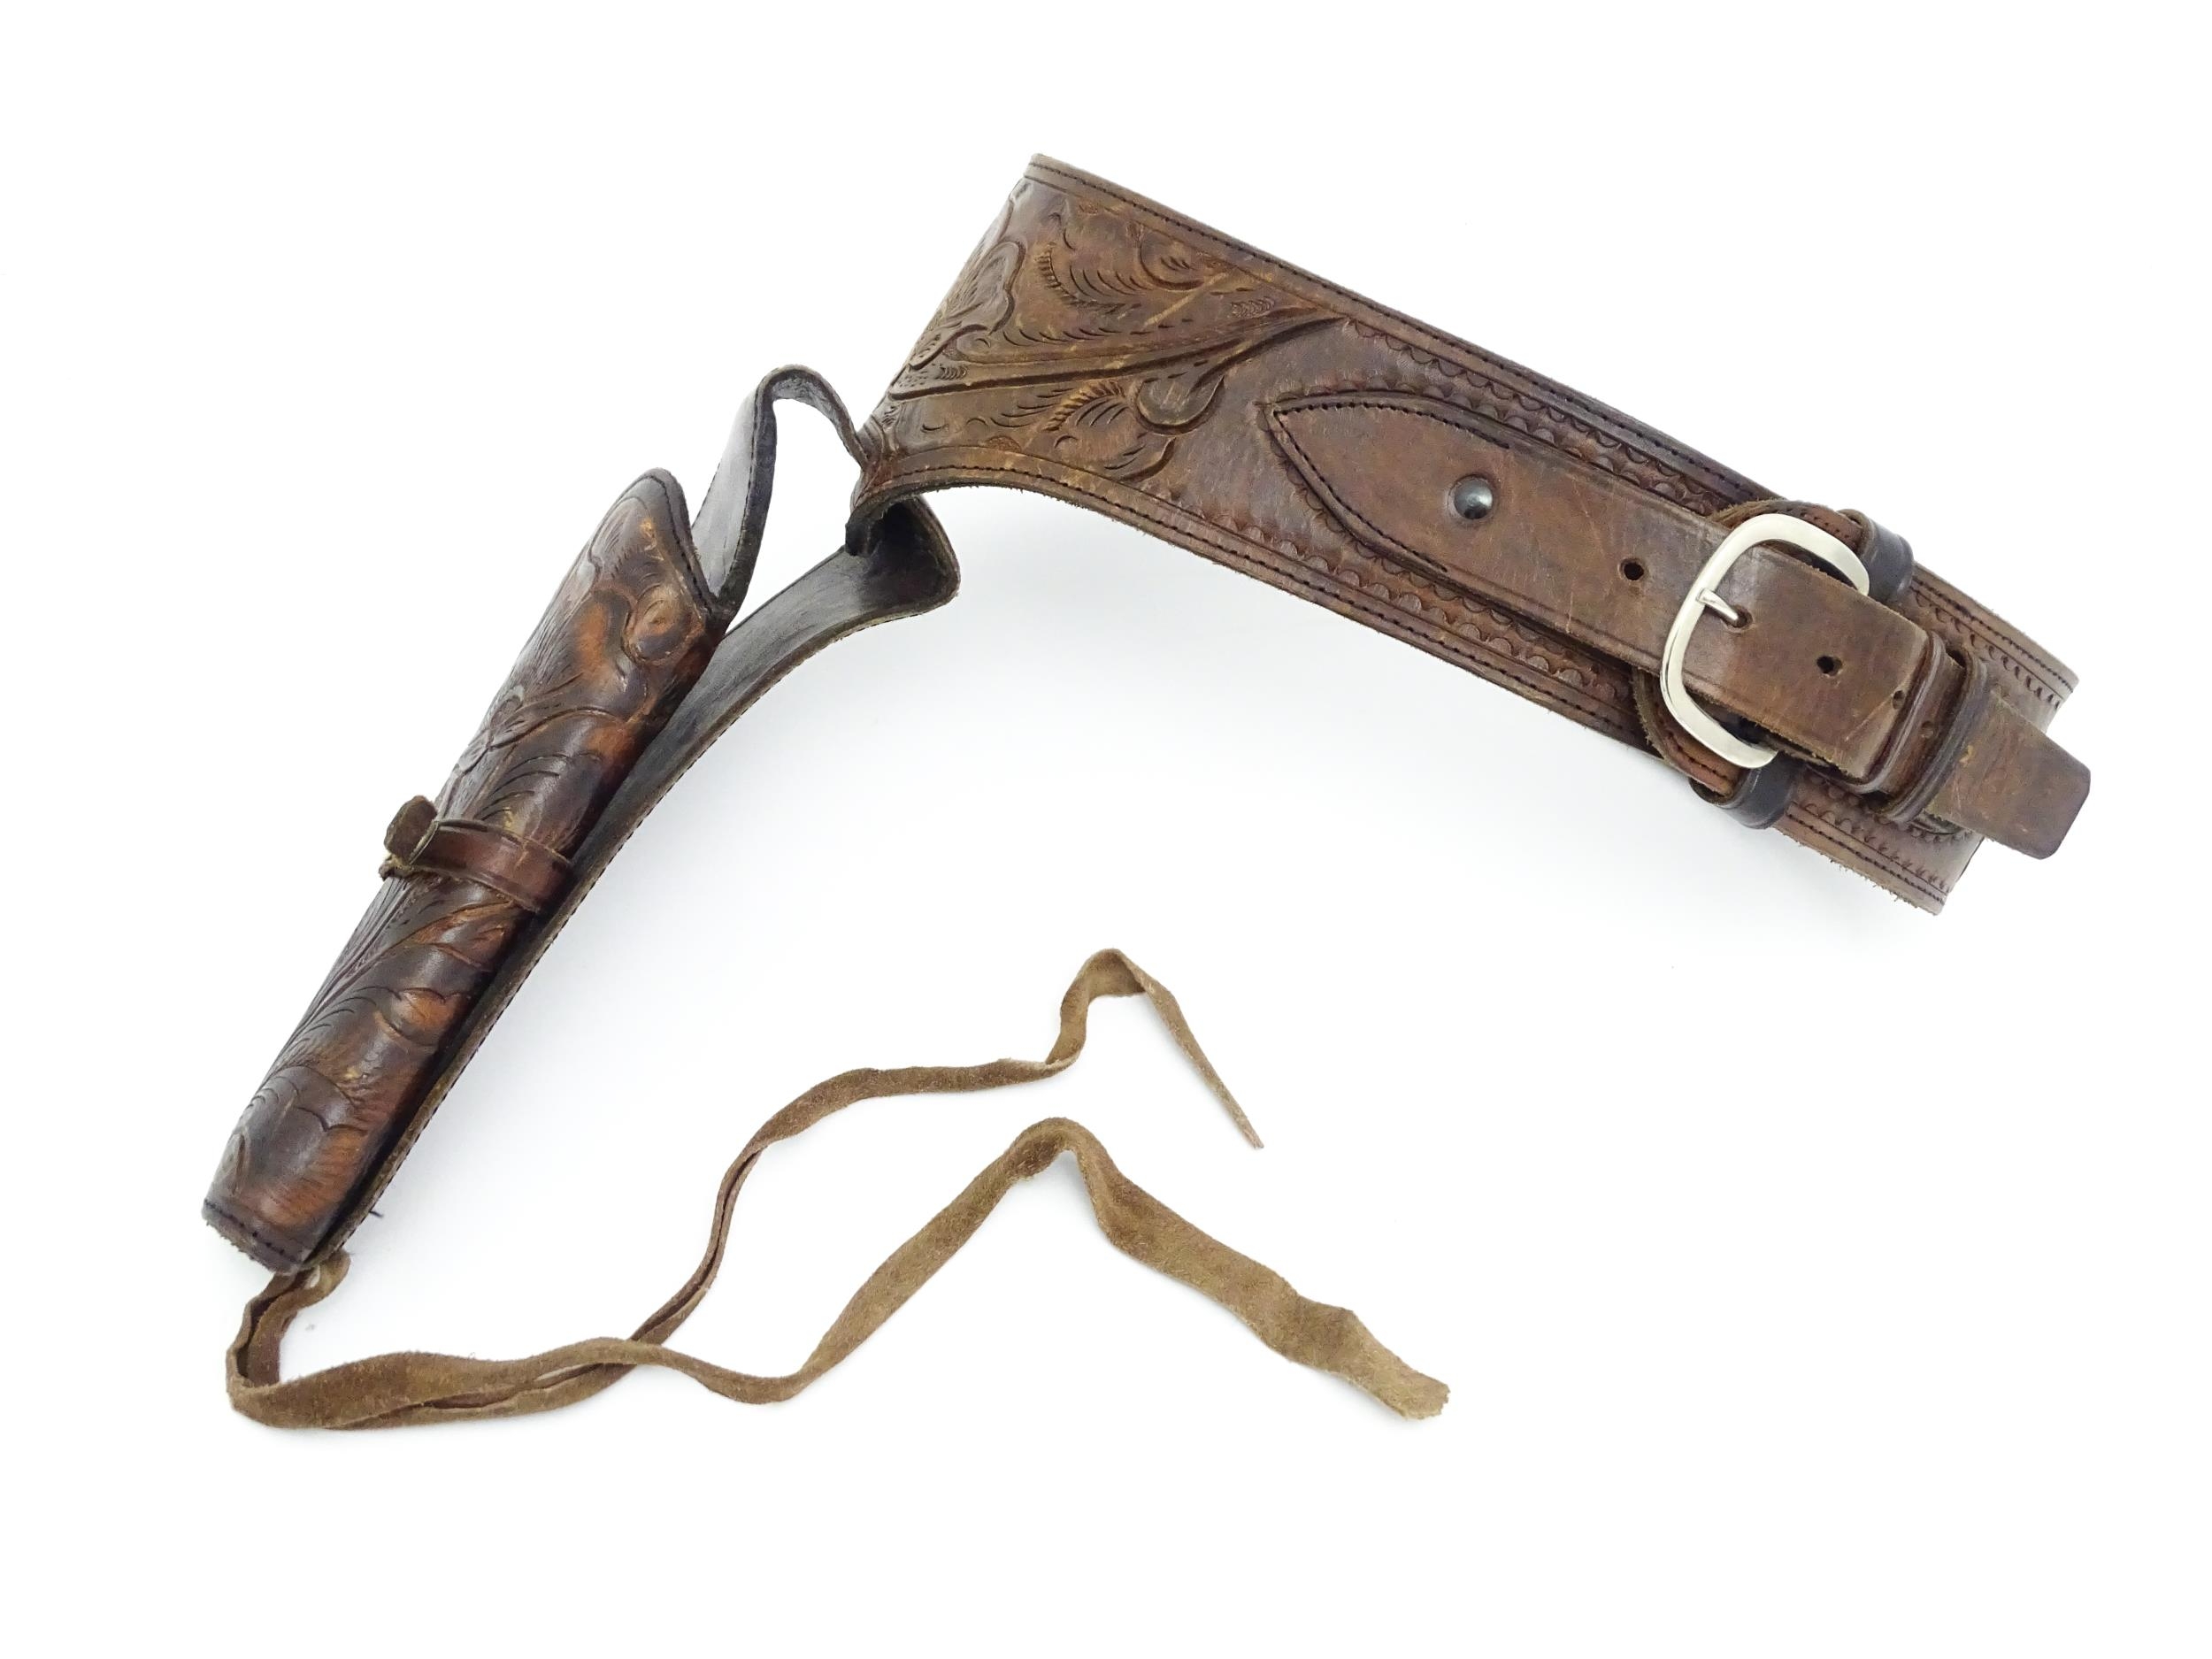 Militaria: a western pistol belt / bandolier with holster and provision for 11 bullets, the